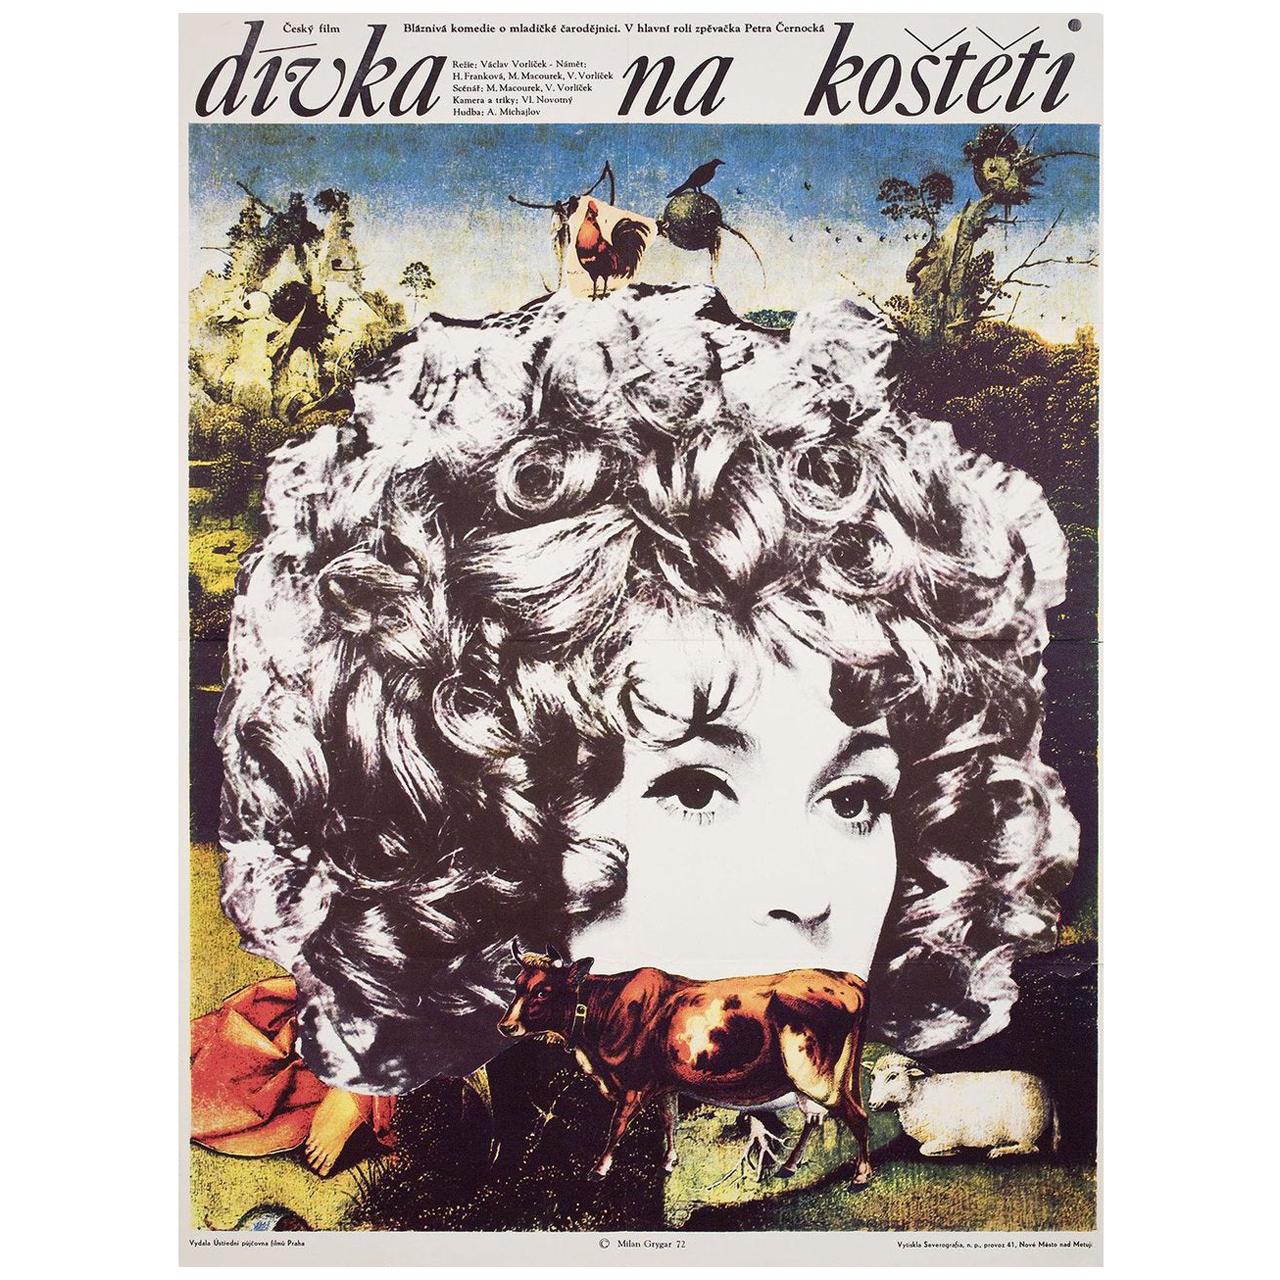 'The Girl on the Broomstick' 1972 Czech A1 Film Poster